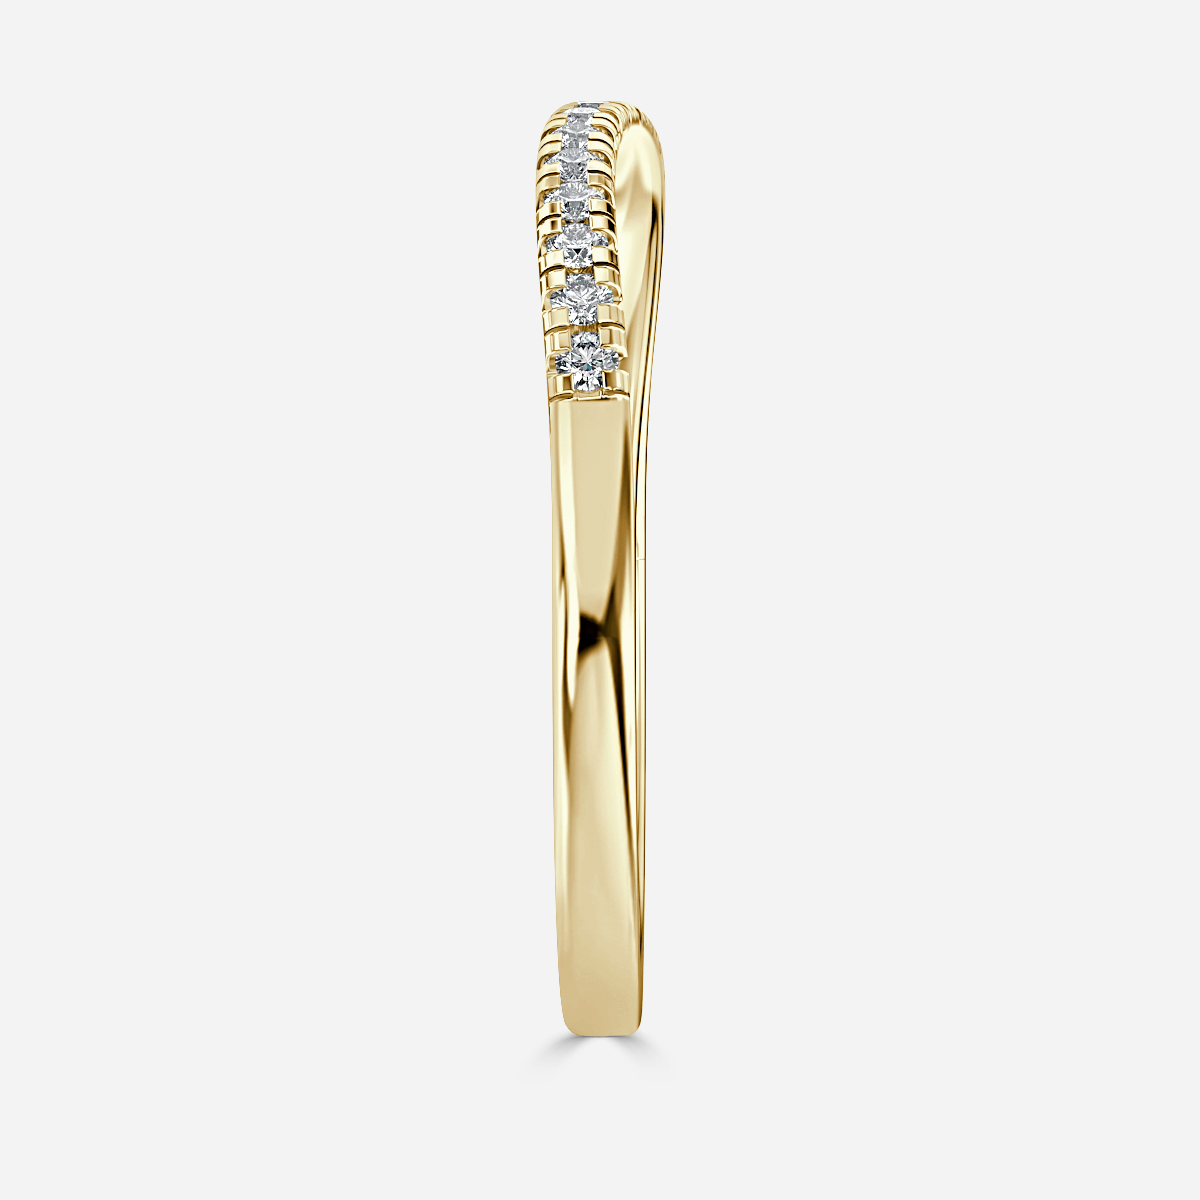 Round Twisted Yellow Gold Wedding Ring